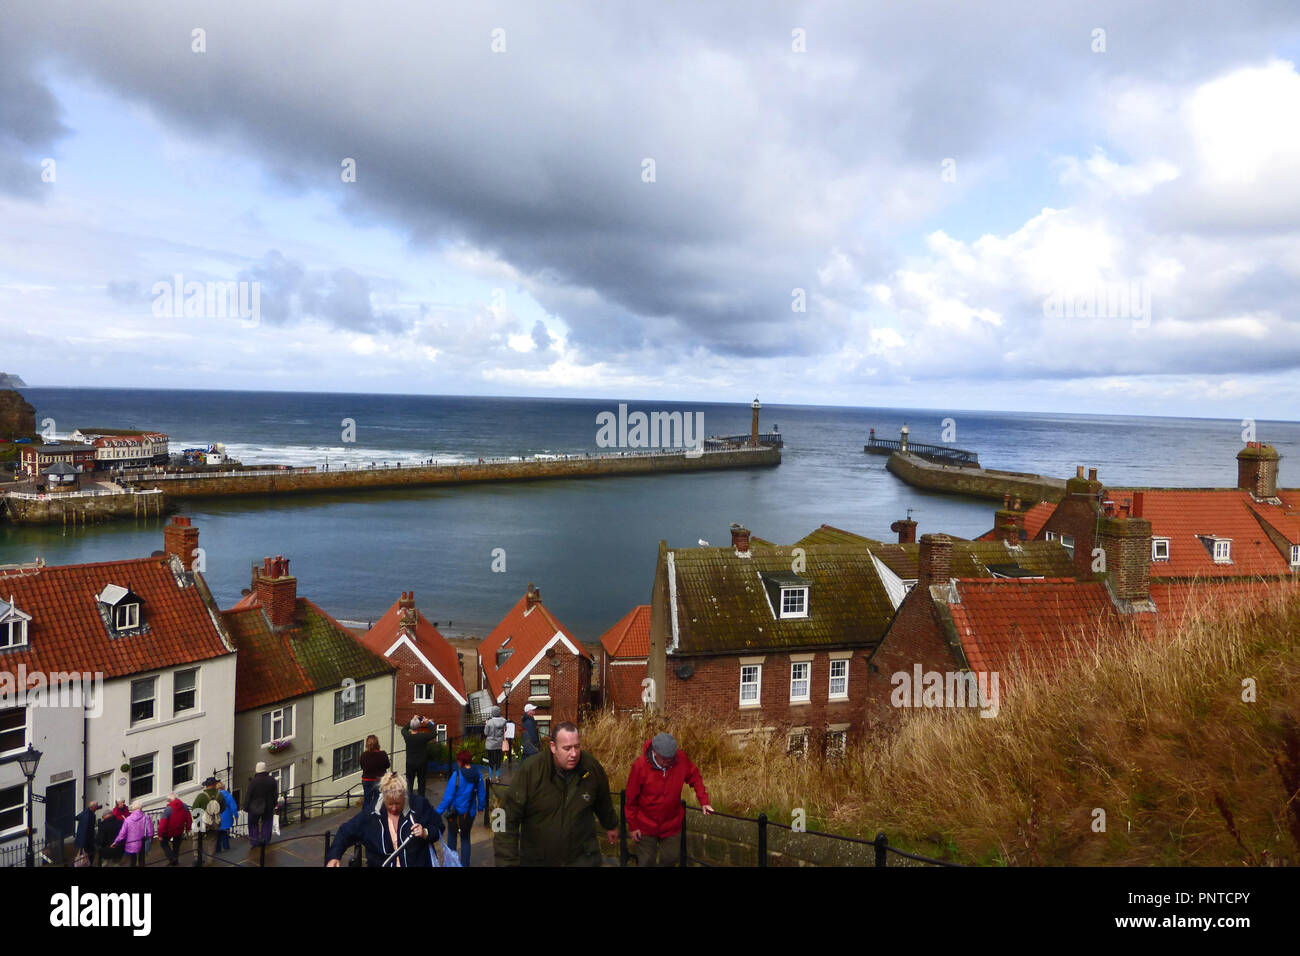 The steps up to the Abbey and view of the harbour entrance at Whitby, Yorkshire with rain threatening Stock Photo